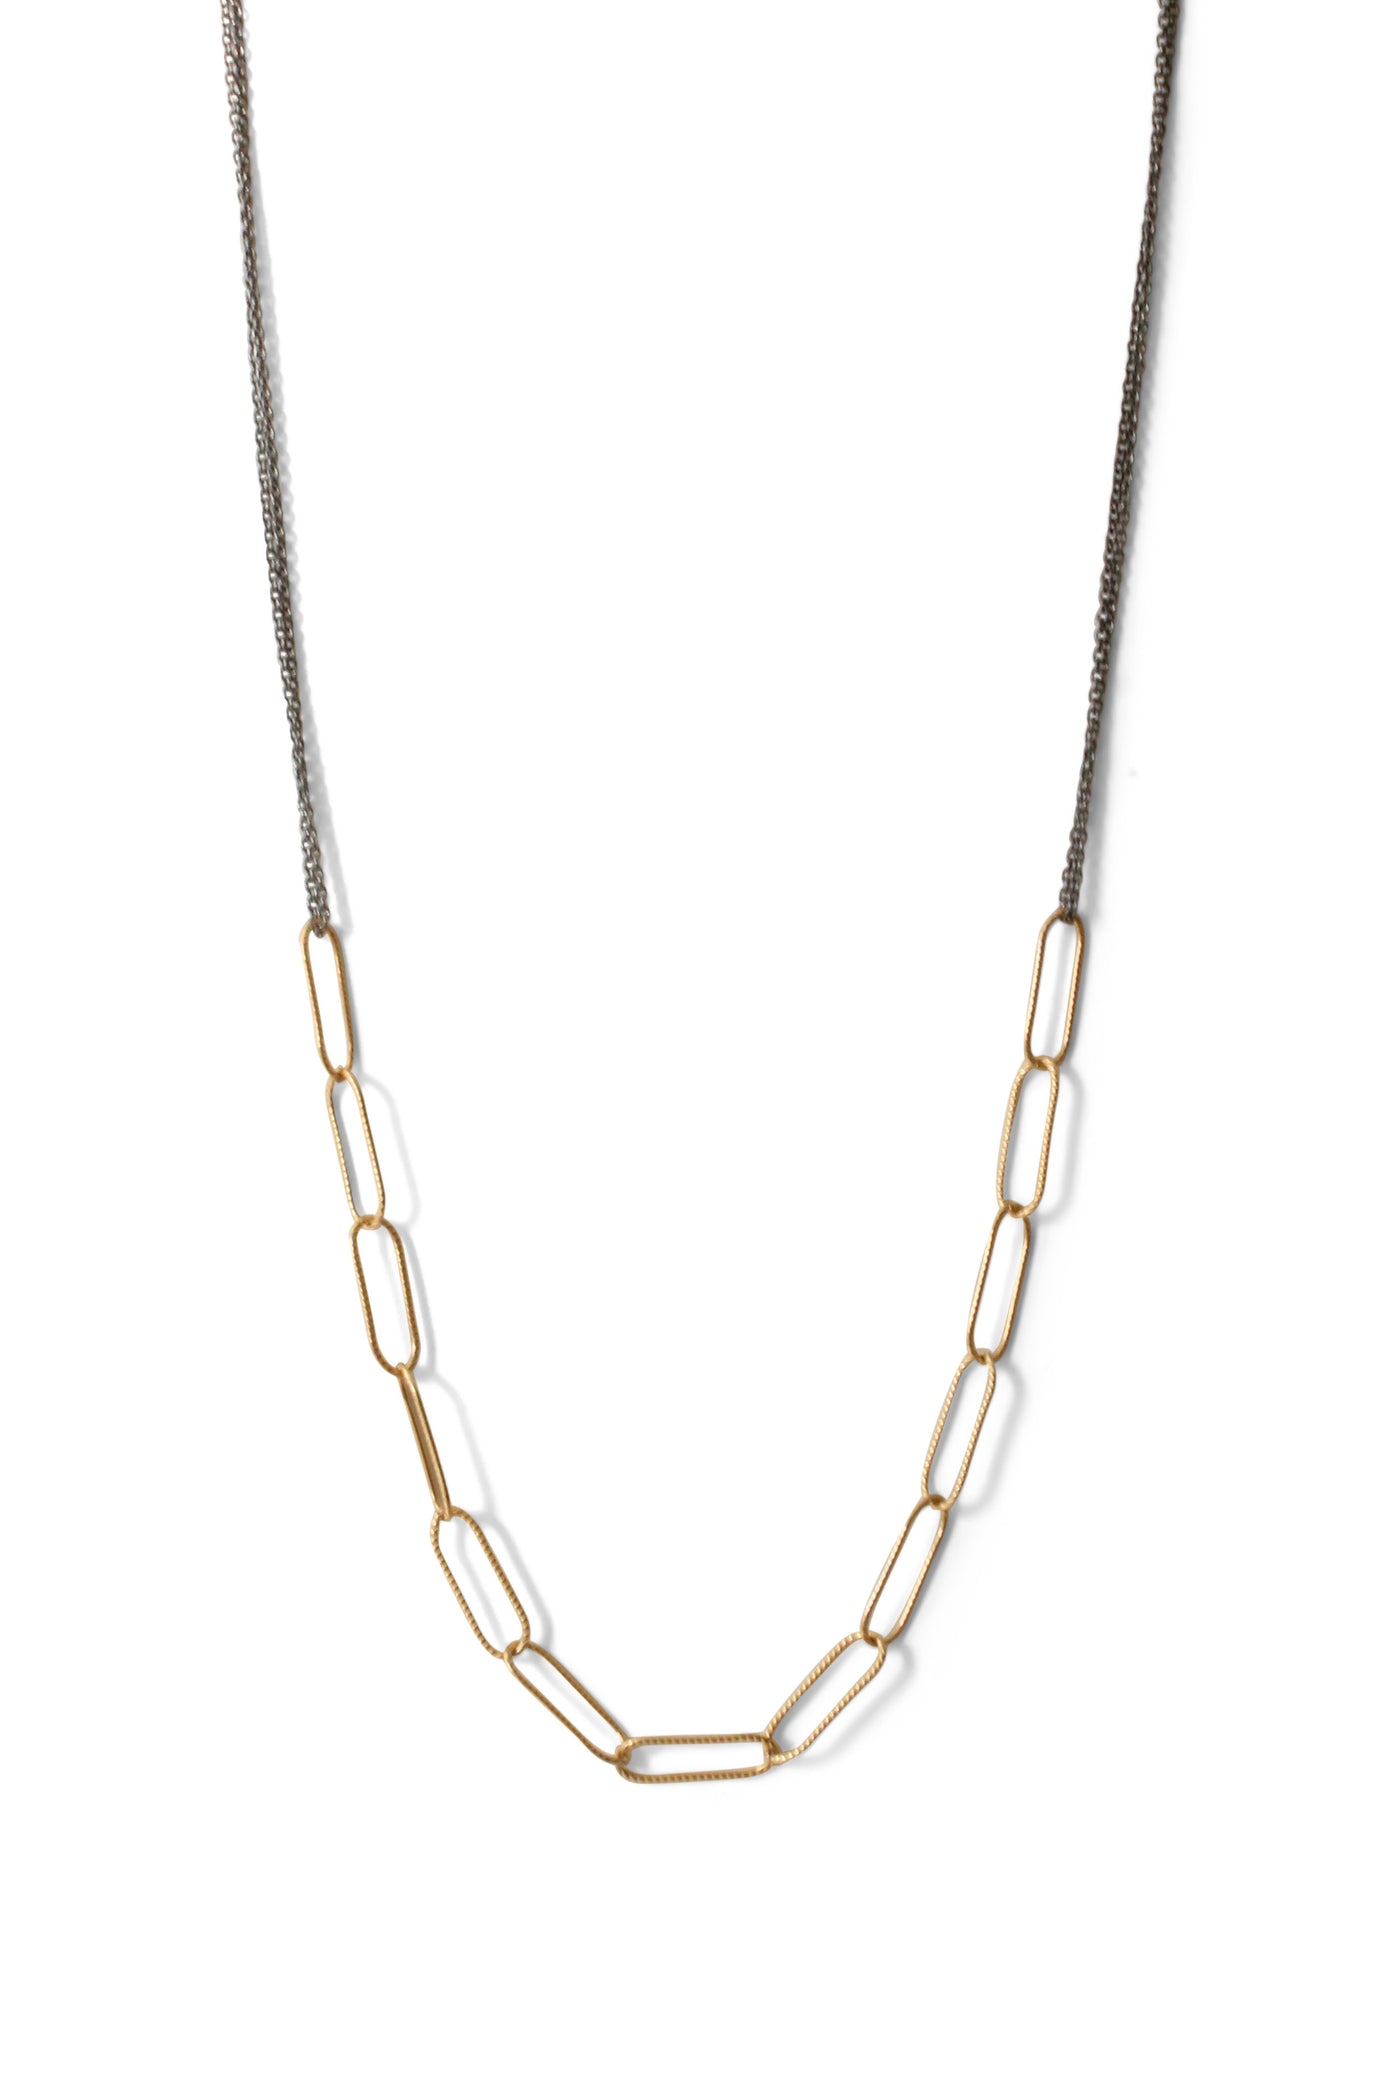 Squared Link Chain Harmony Necklace 18 Inches